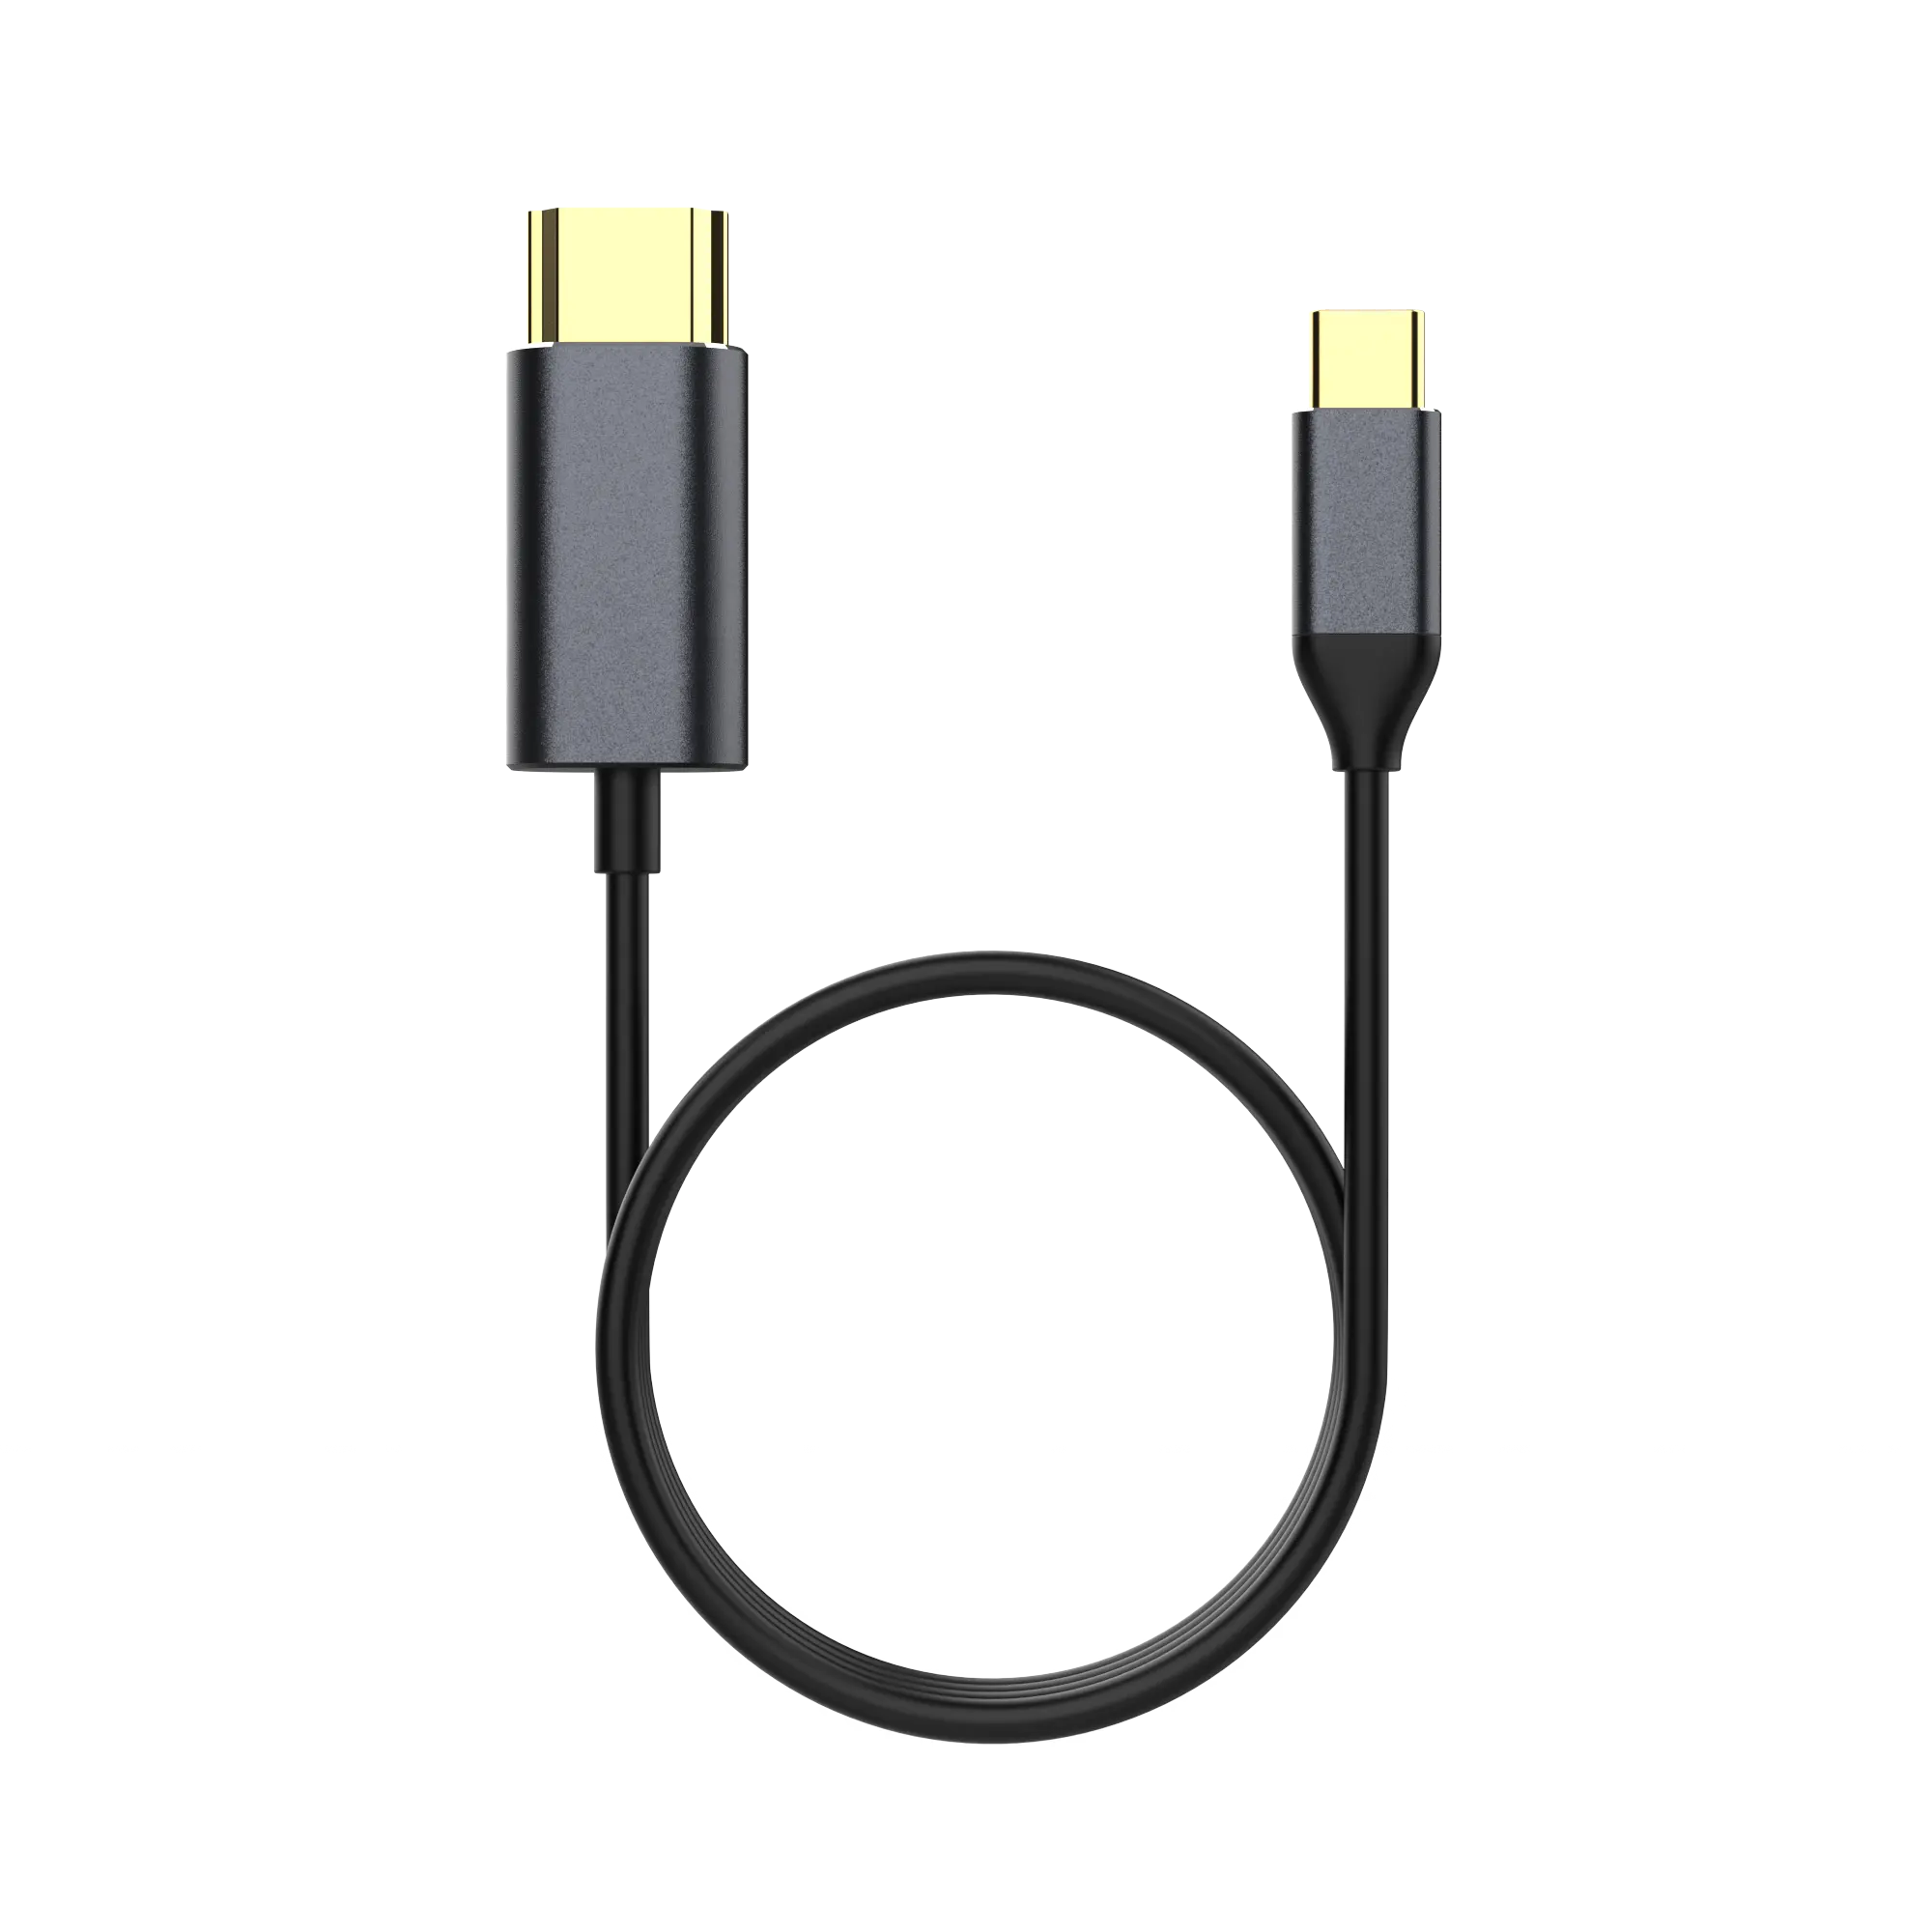 Good quality USB-C to HDMI Magnetic Cable with Micro USB 2.0 Connectors Nylon Material Braid Shielding Charging Multifunction Us